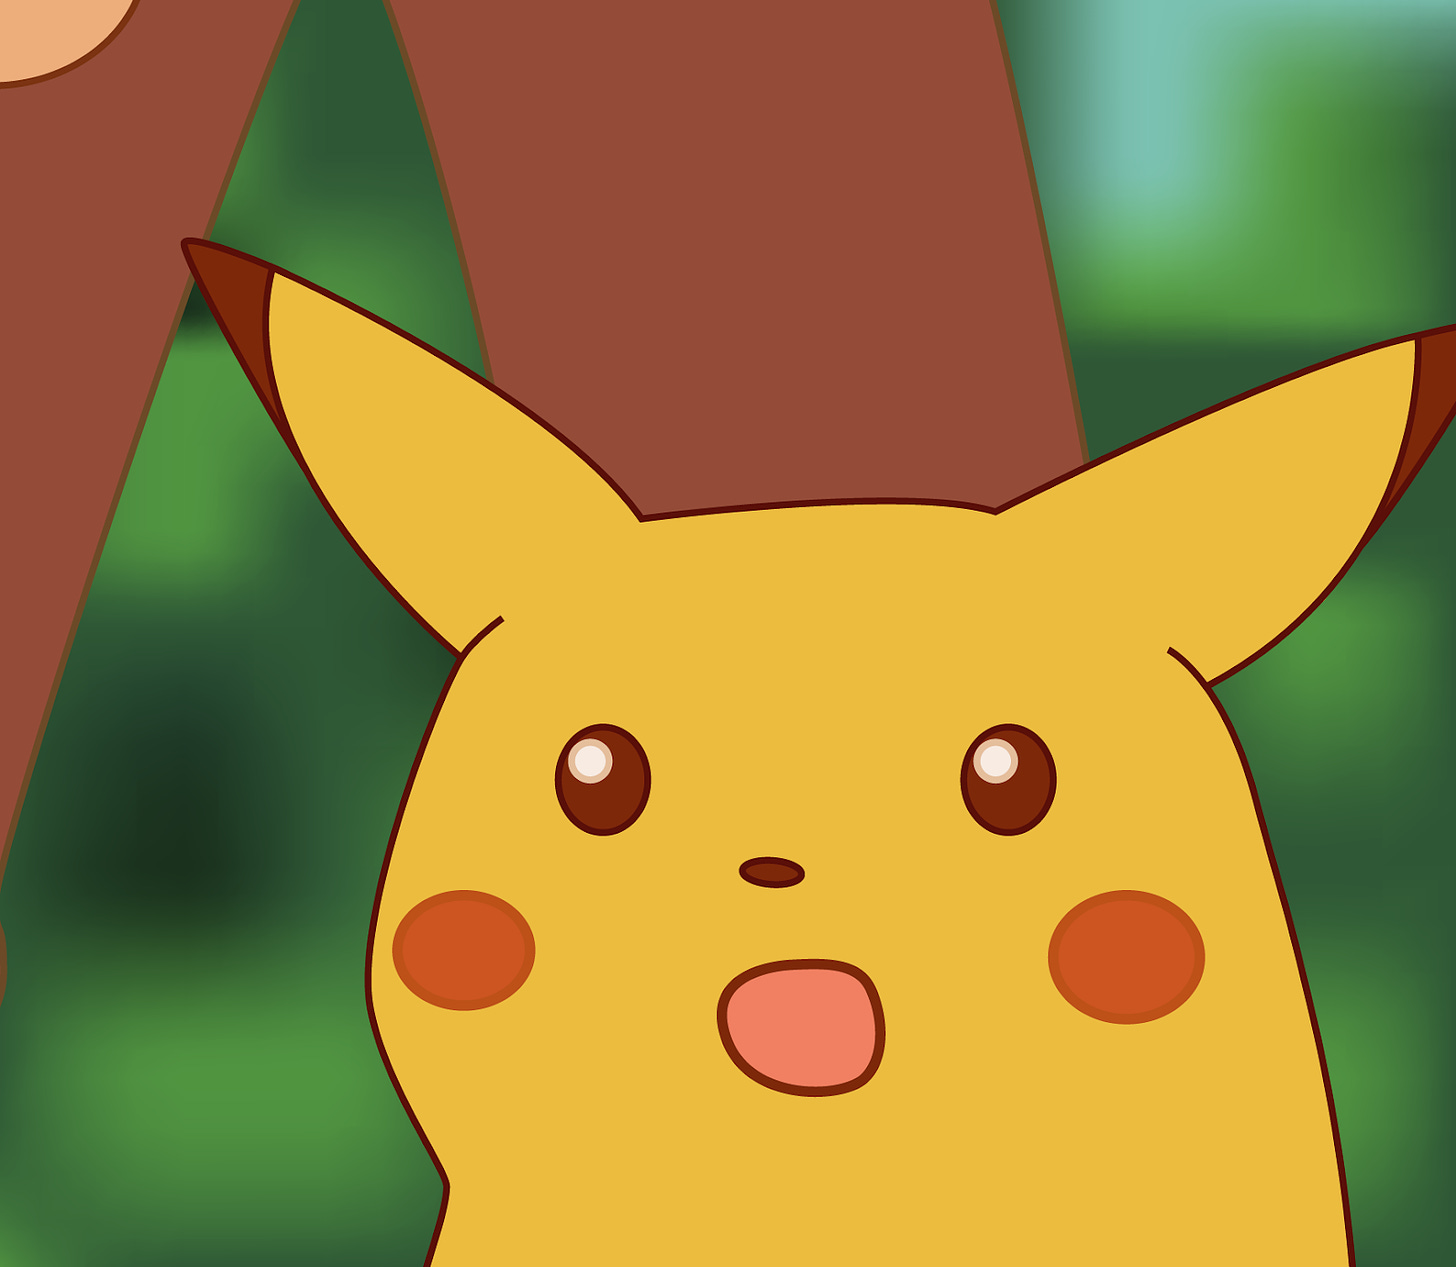 a meme showing pikachu, a pokemon character looking shocked